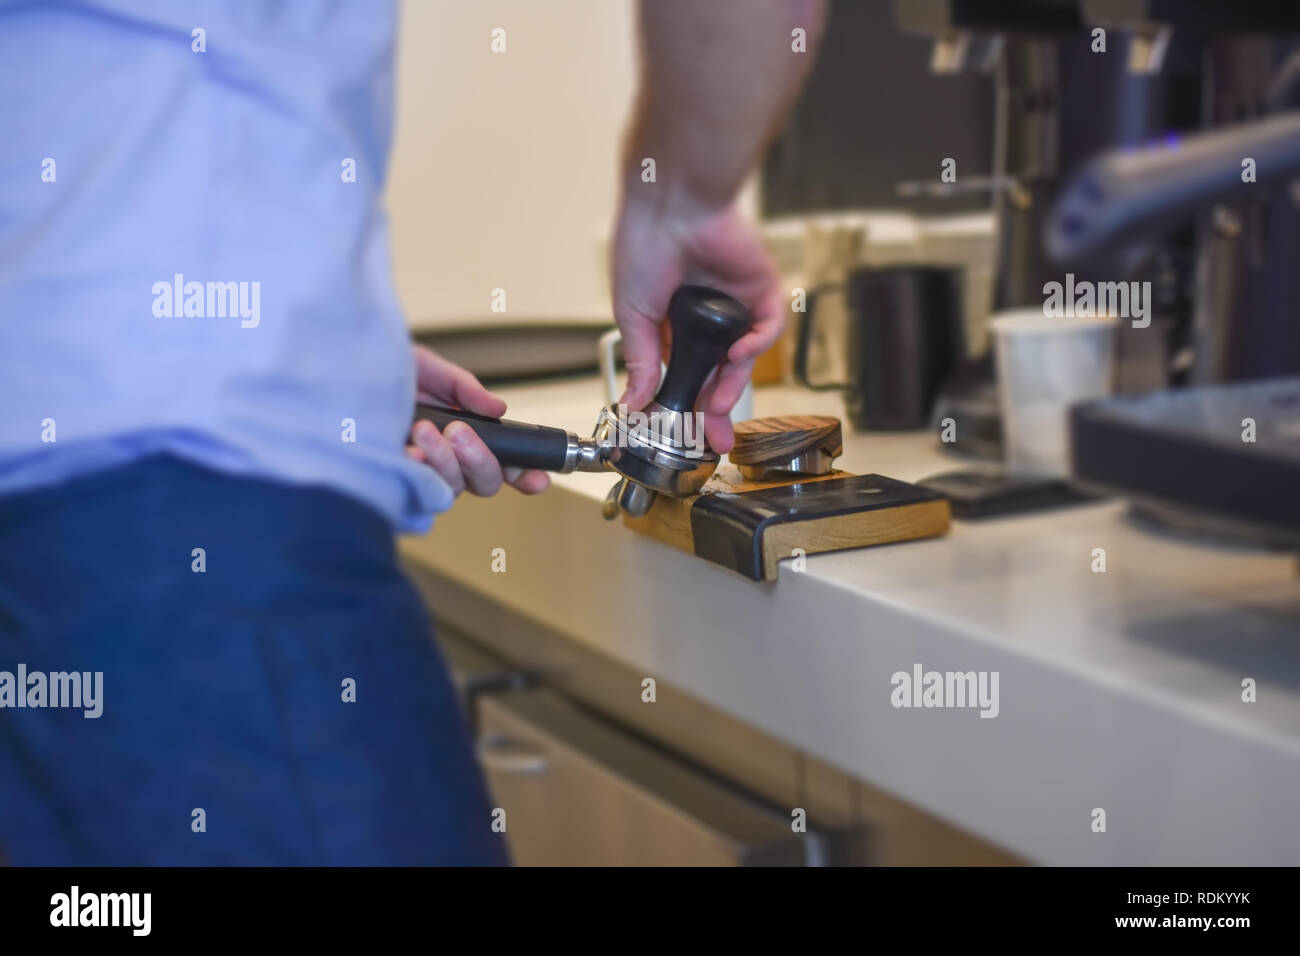 Hipster barista using tamper making perfect fresh professional cup of coffee Stock Photo